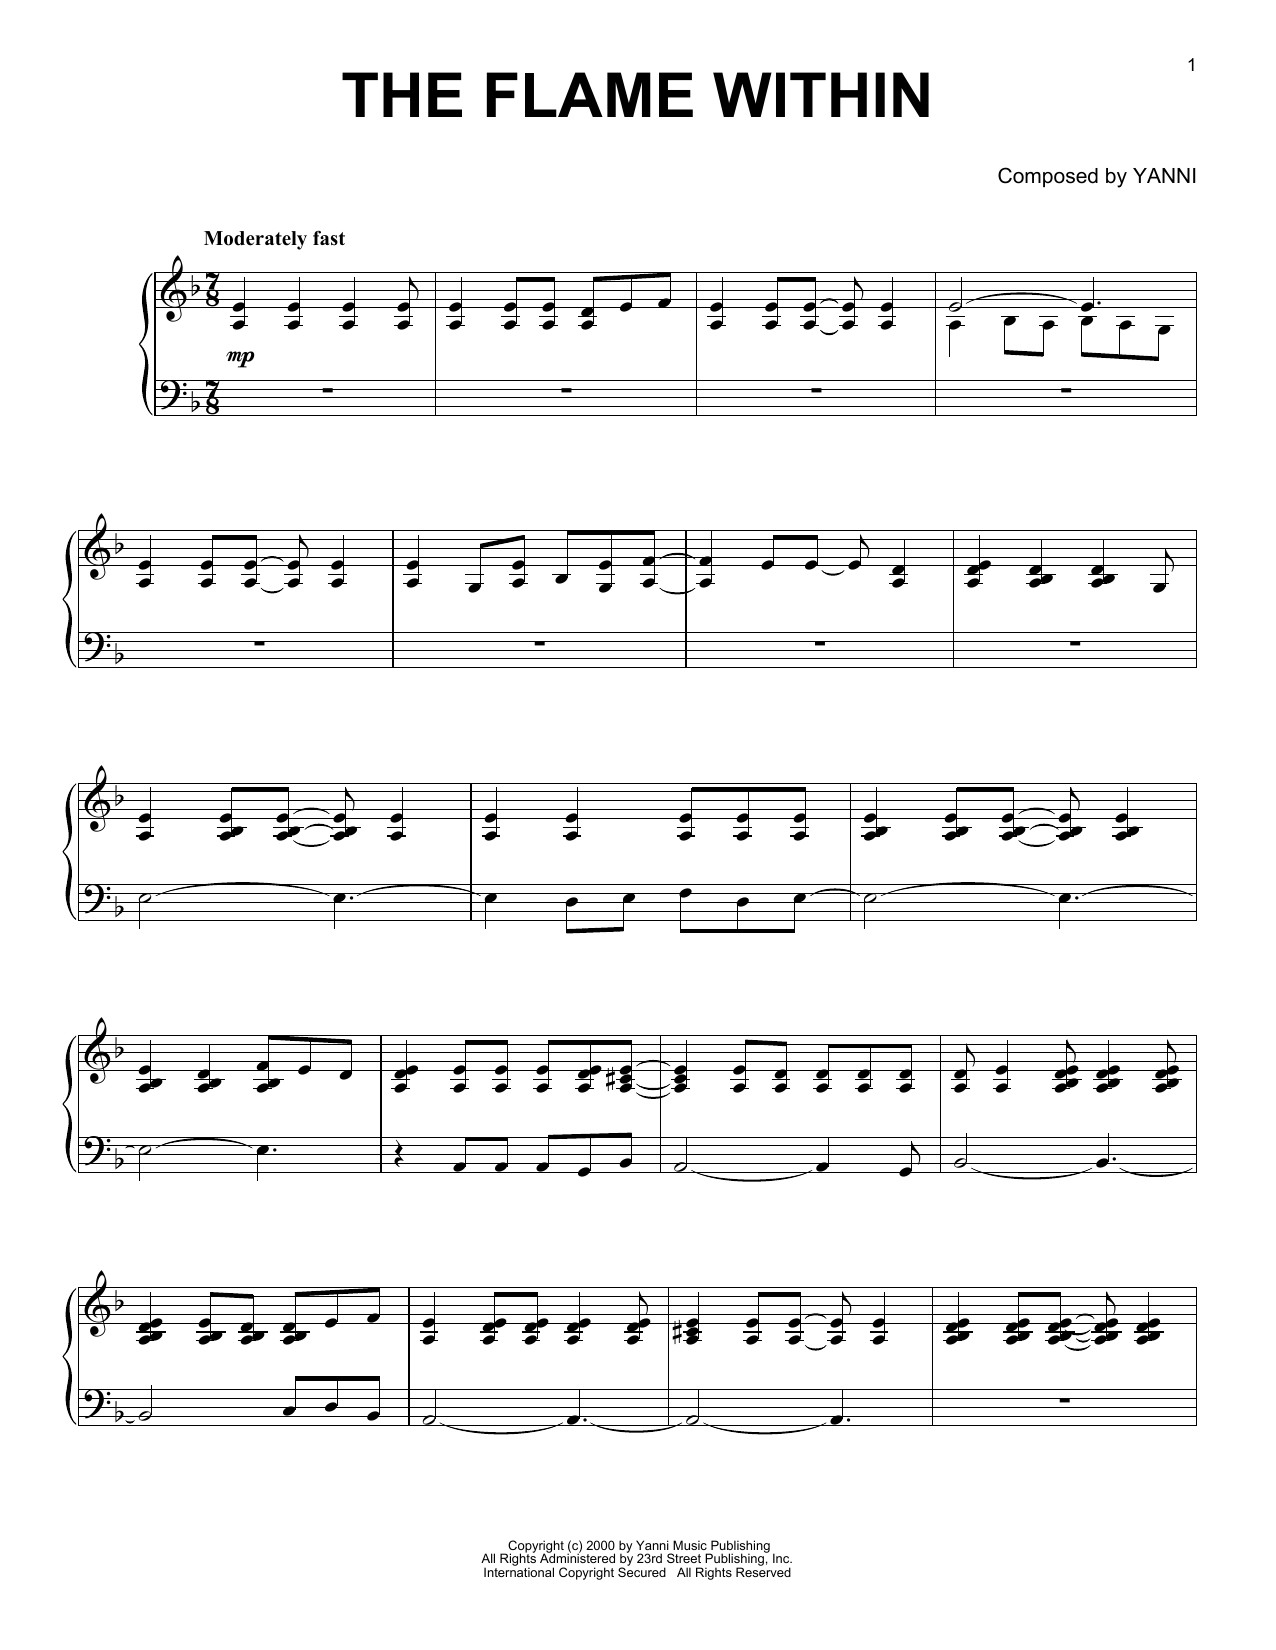 Download Yanni The Flame Within Sheet Music